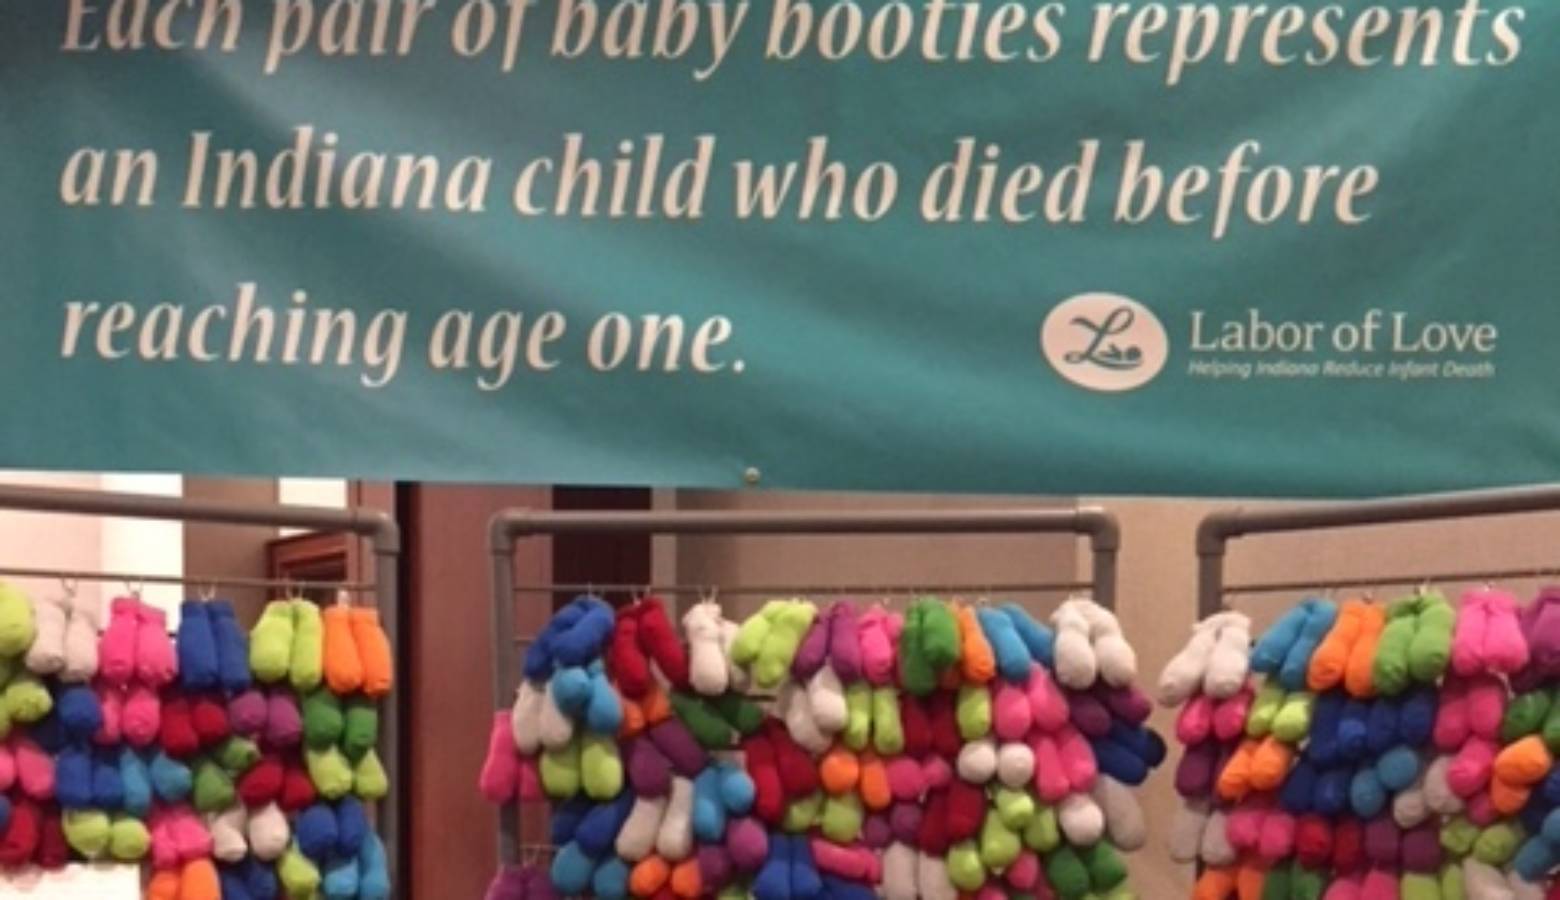 A display at the Indiana Labor of Love summit, each pair of booties represents a Hoosier child who died before their first birthday. (IPB News/Jill Sheridan)